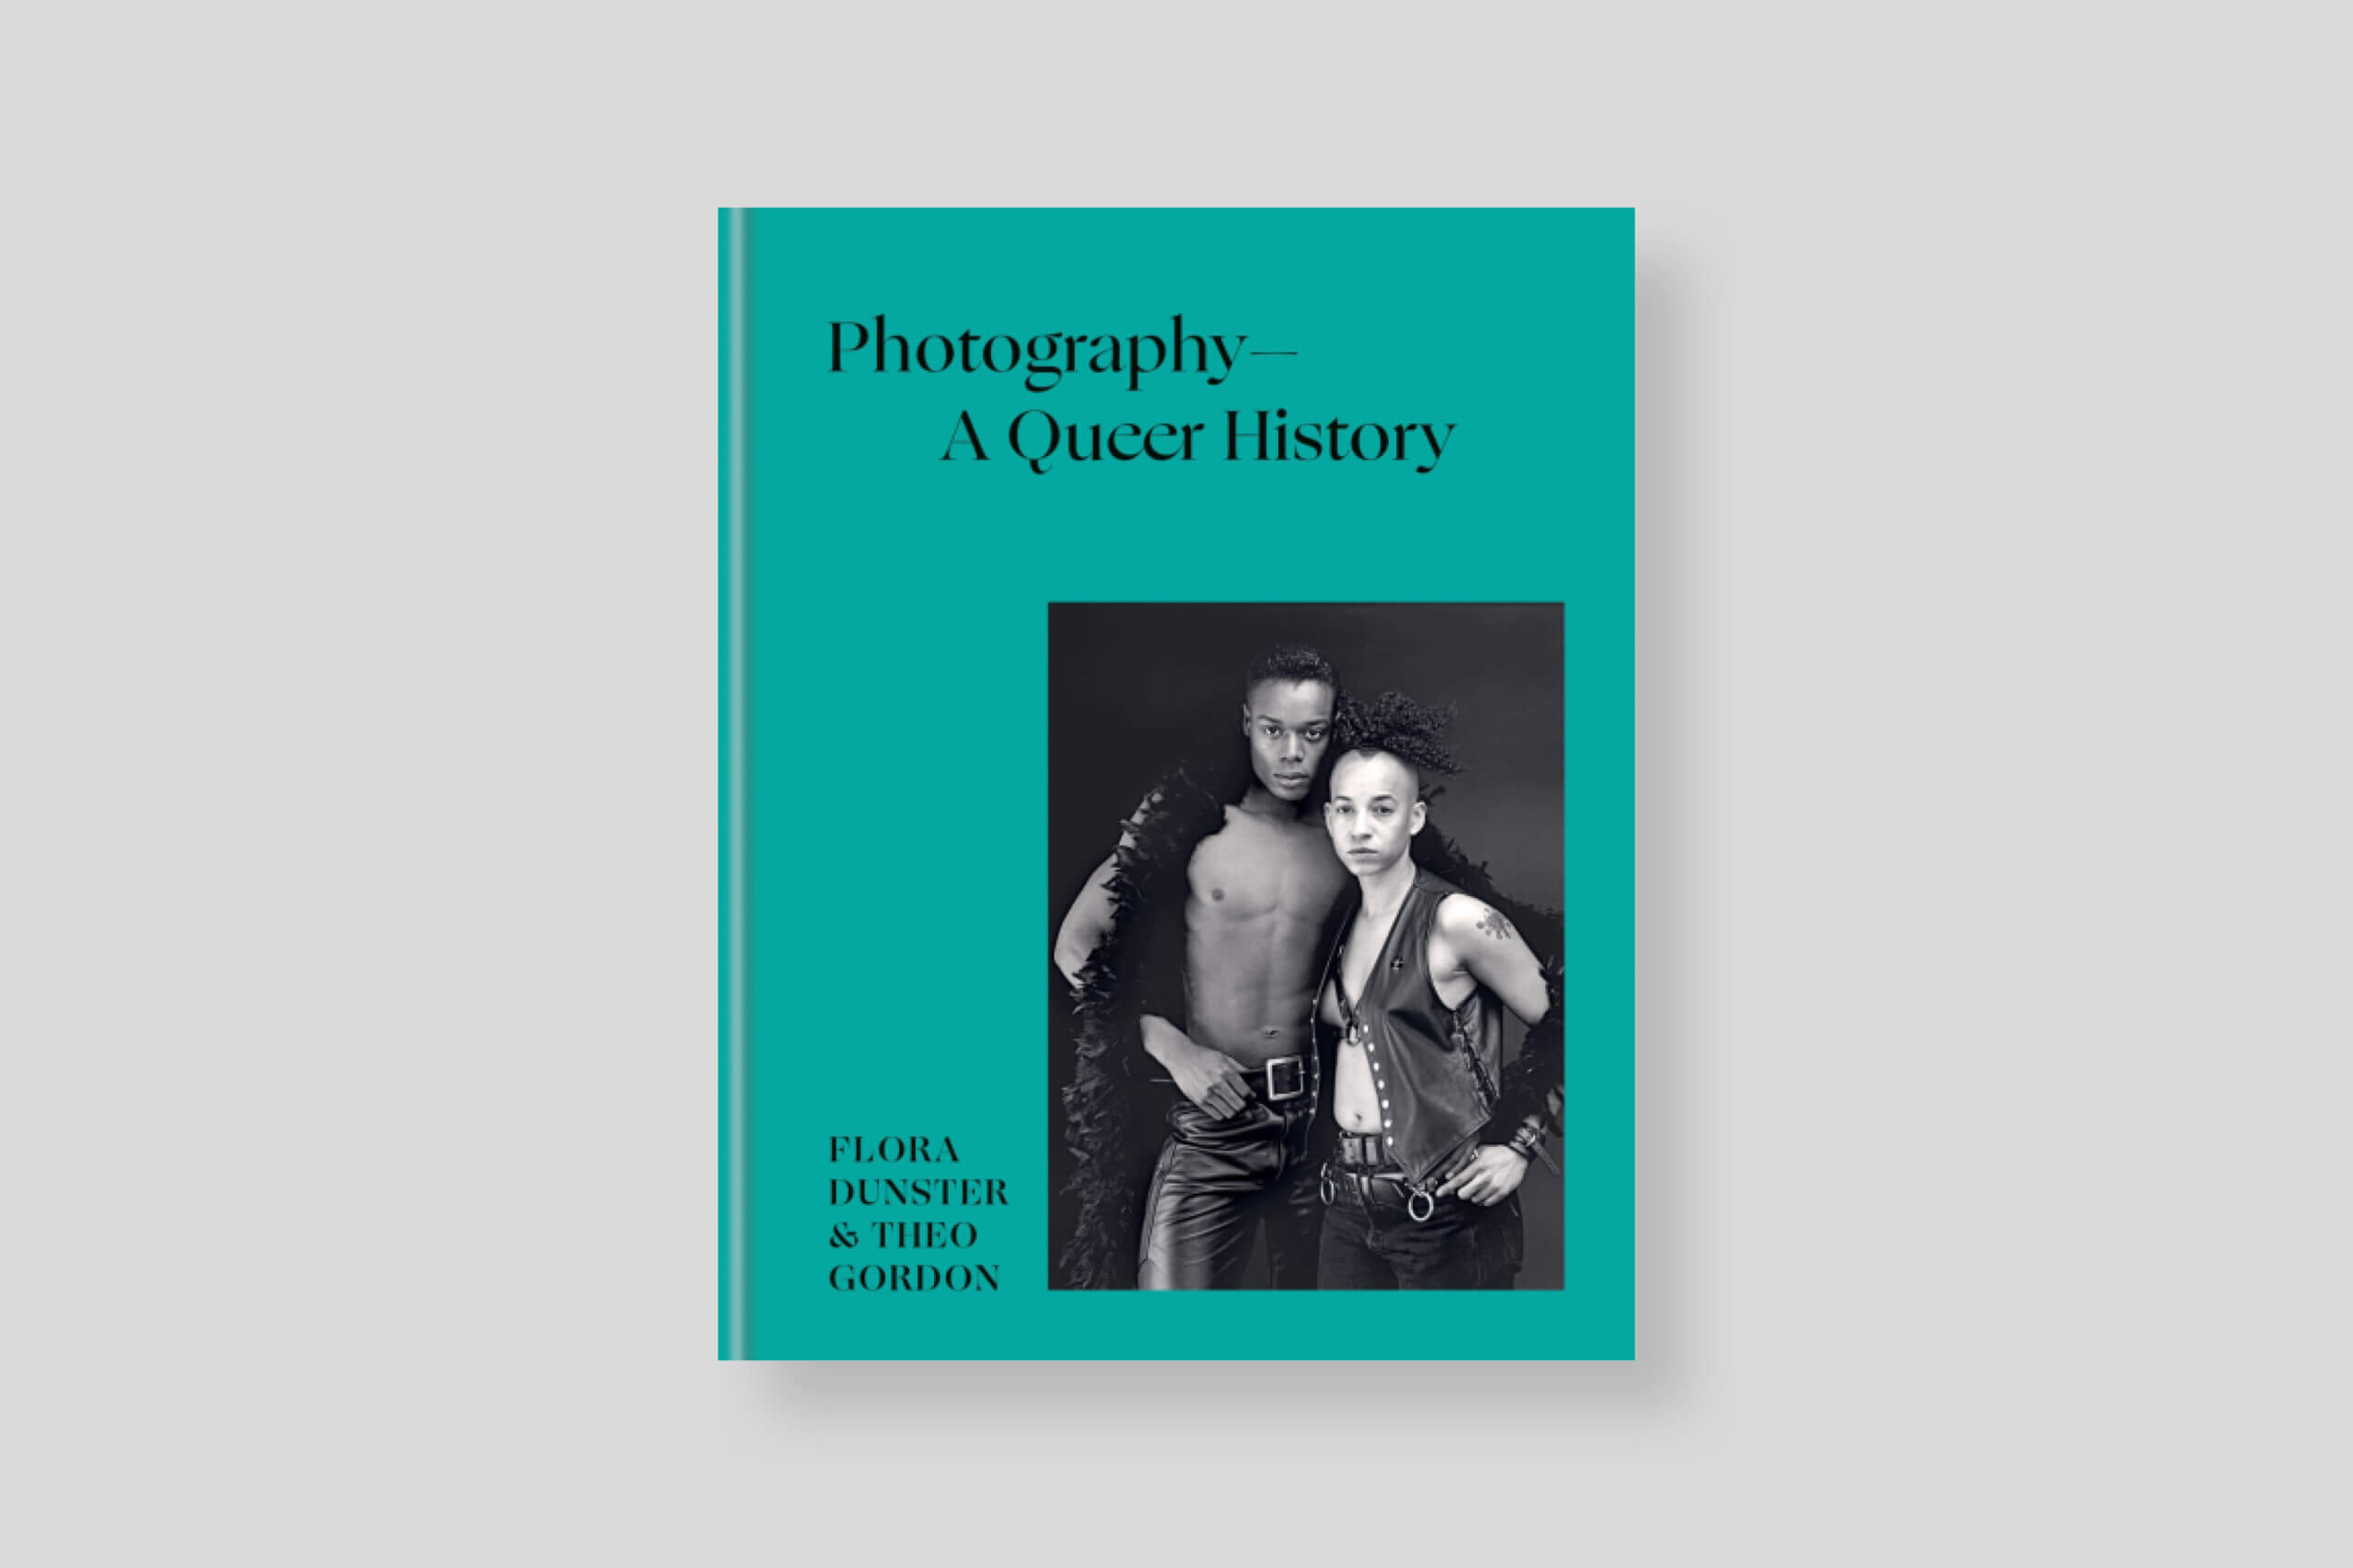 photography-a-queer-history-dunster-gordon-ilex-press-cover